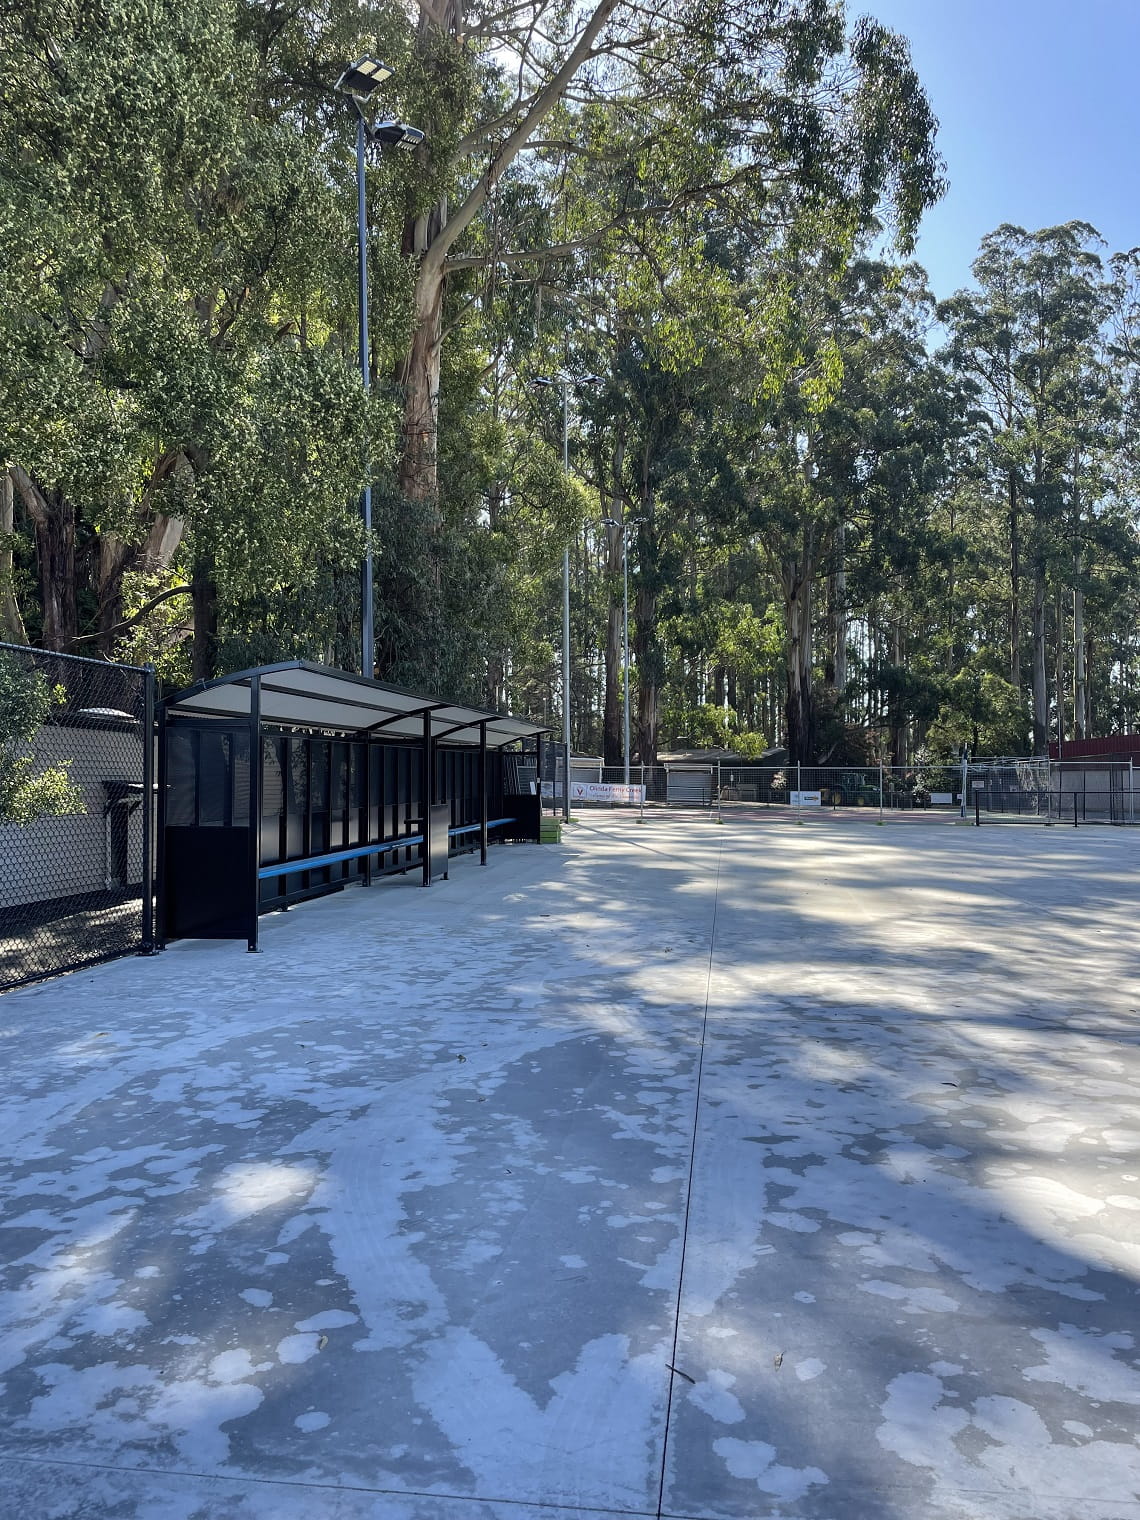 The new netball court at Olinda Recreation Reserve. Concrete has been poured, and a new shelter has been installed. The acrylic surface is yet to be installed.